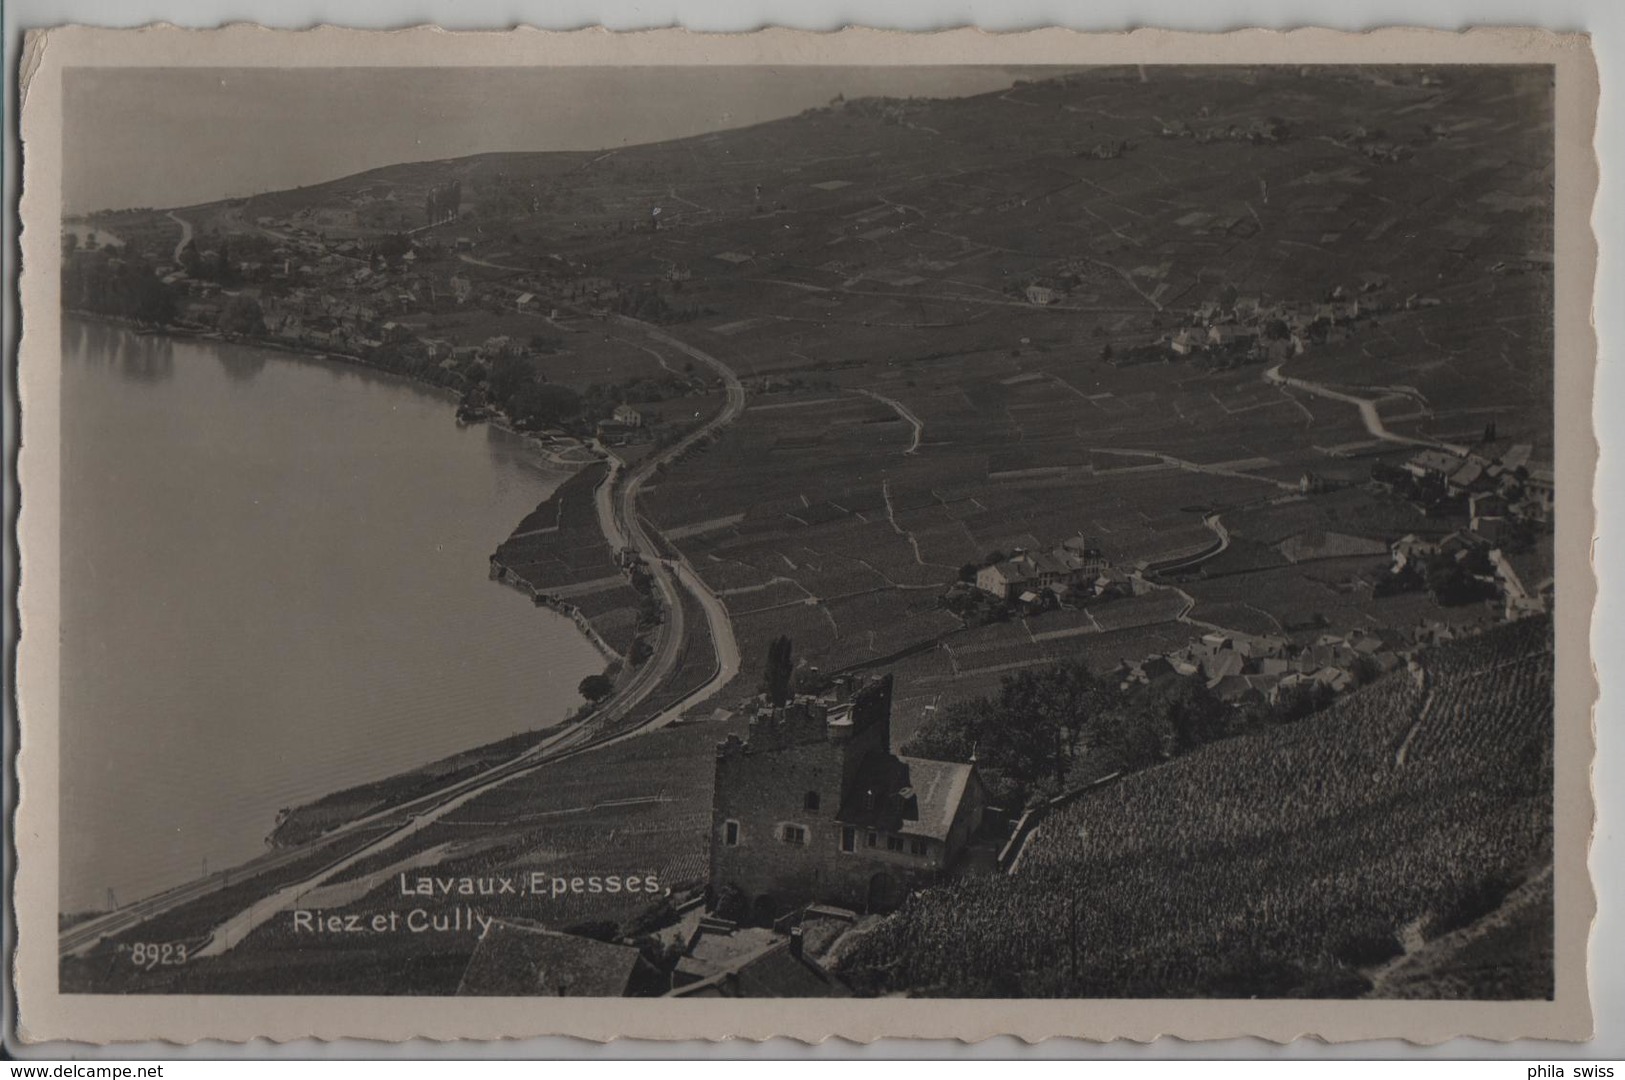 Lavaux, Epesses, Riez Et Cully - Photo: Perrochet-Matile No. 8923 - Cully